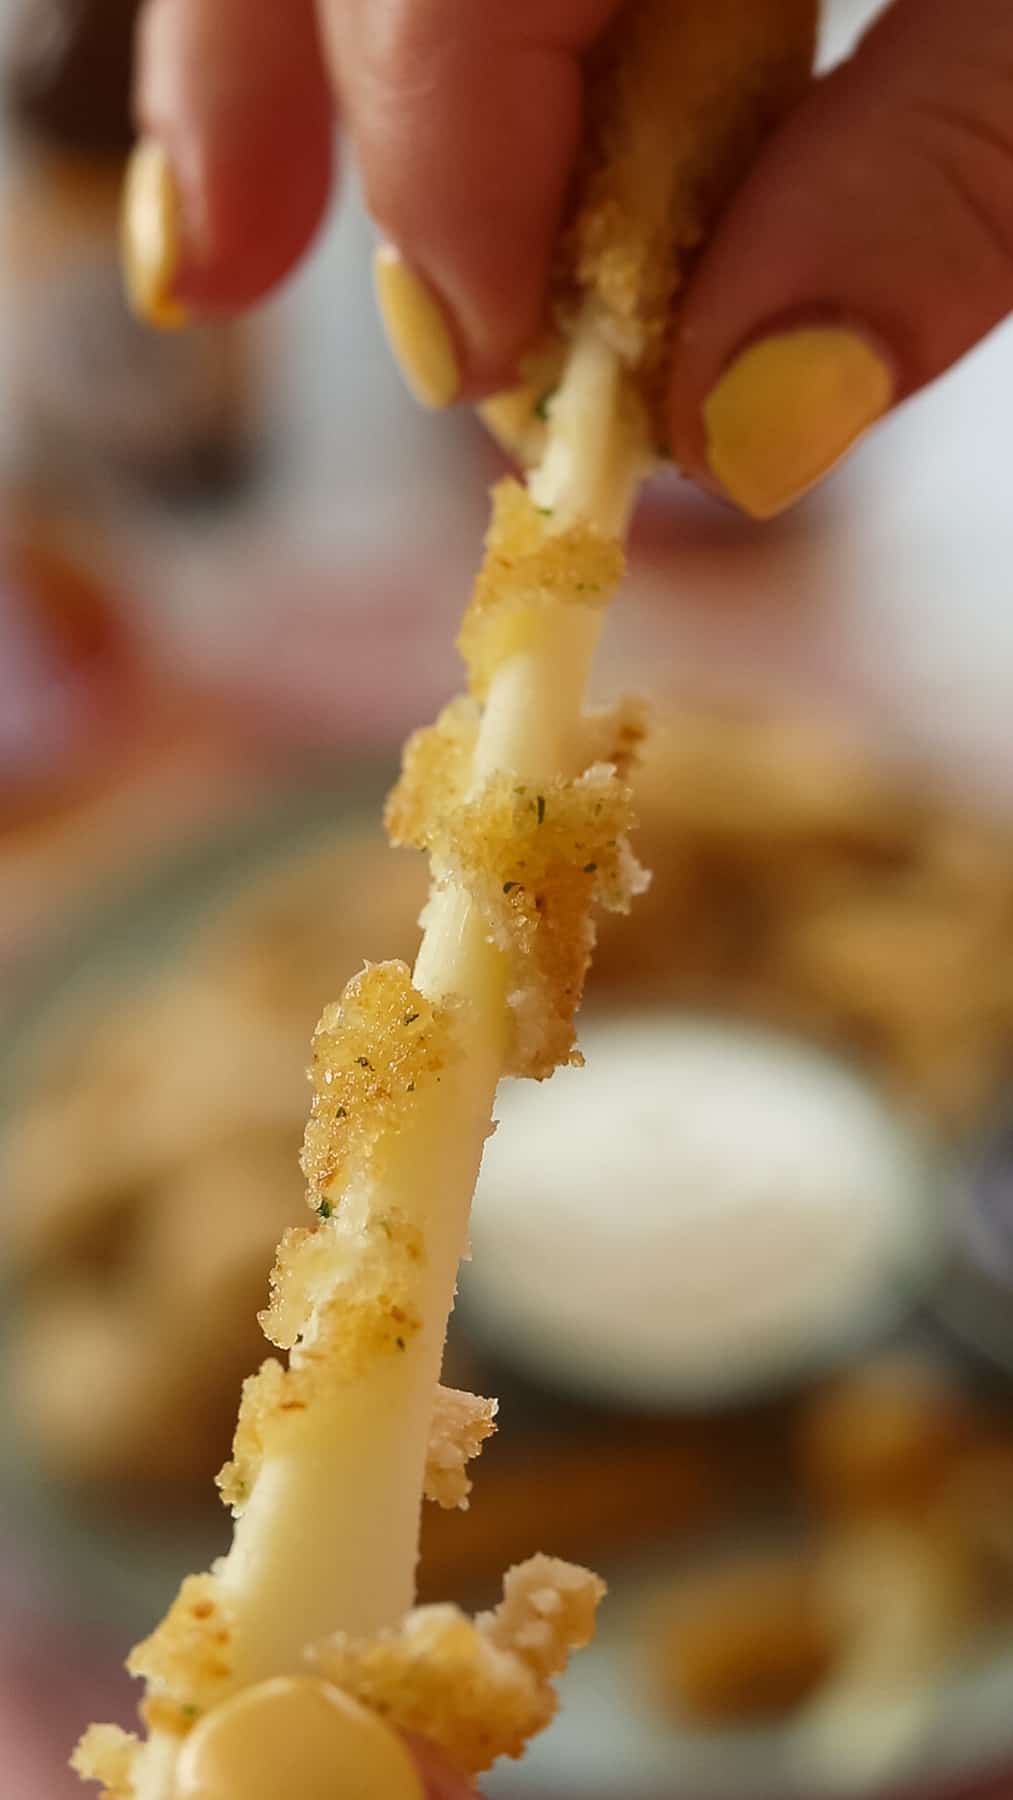 a mozzarella stick being pulled apart.